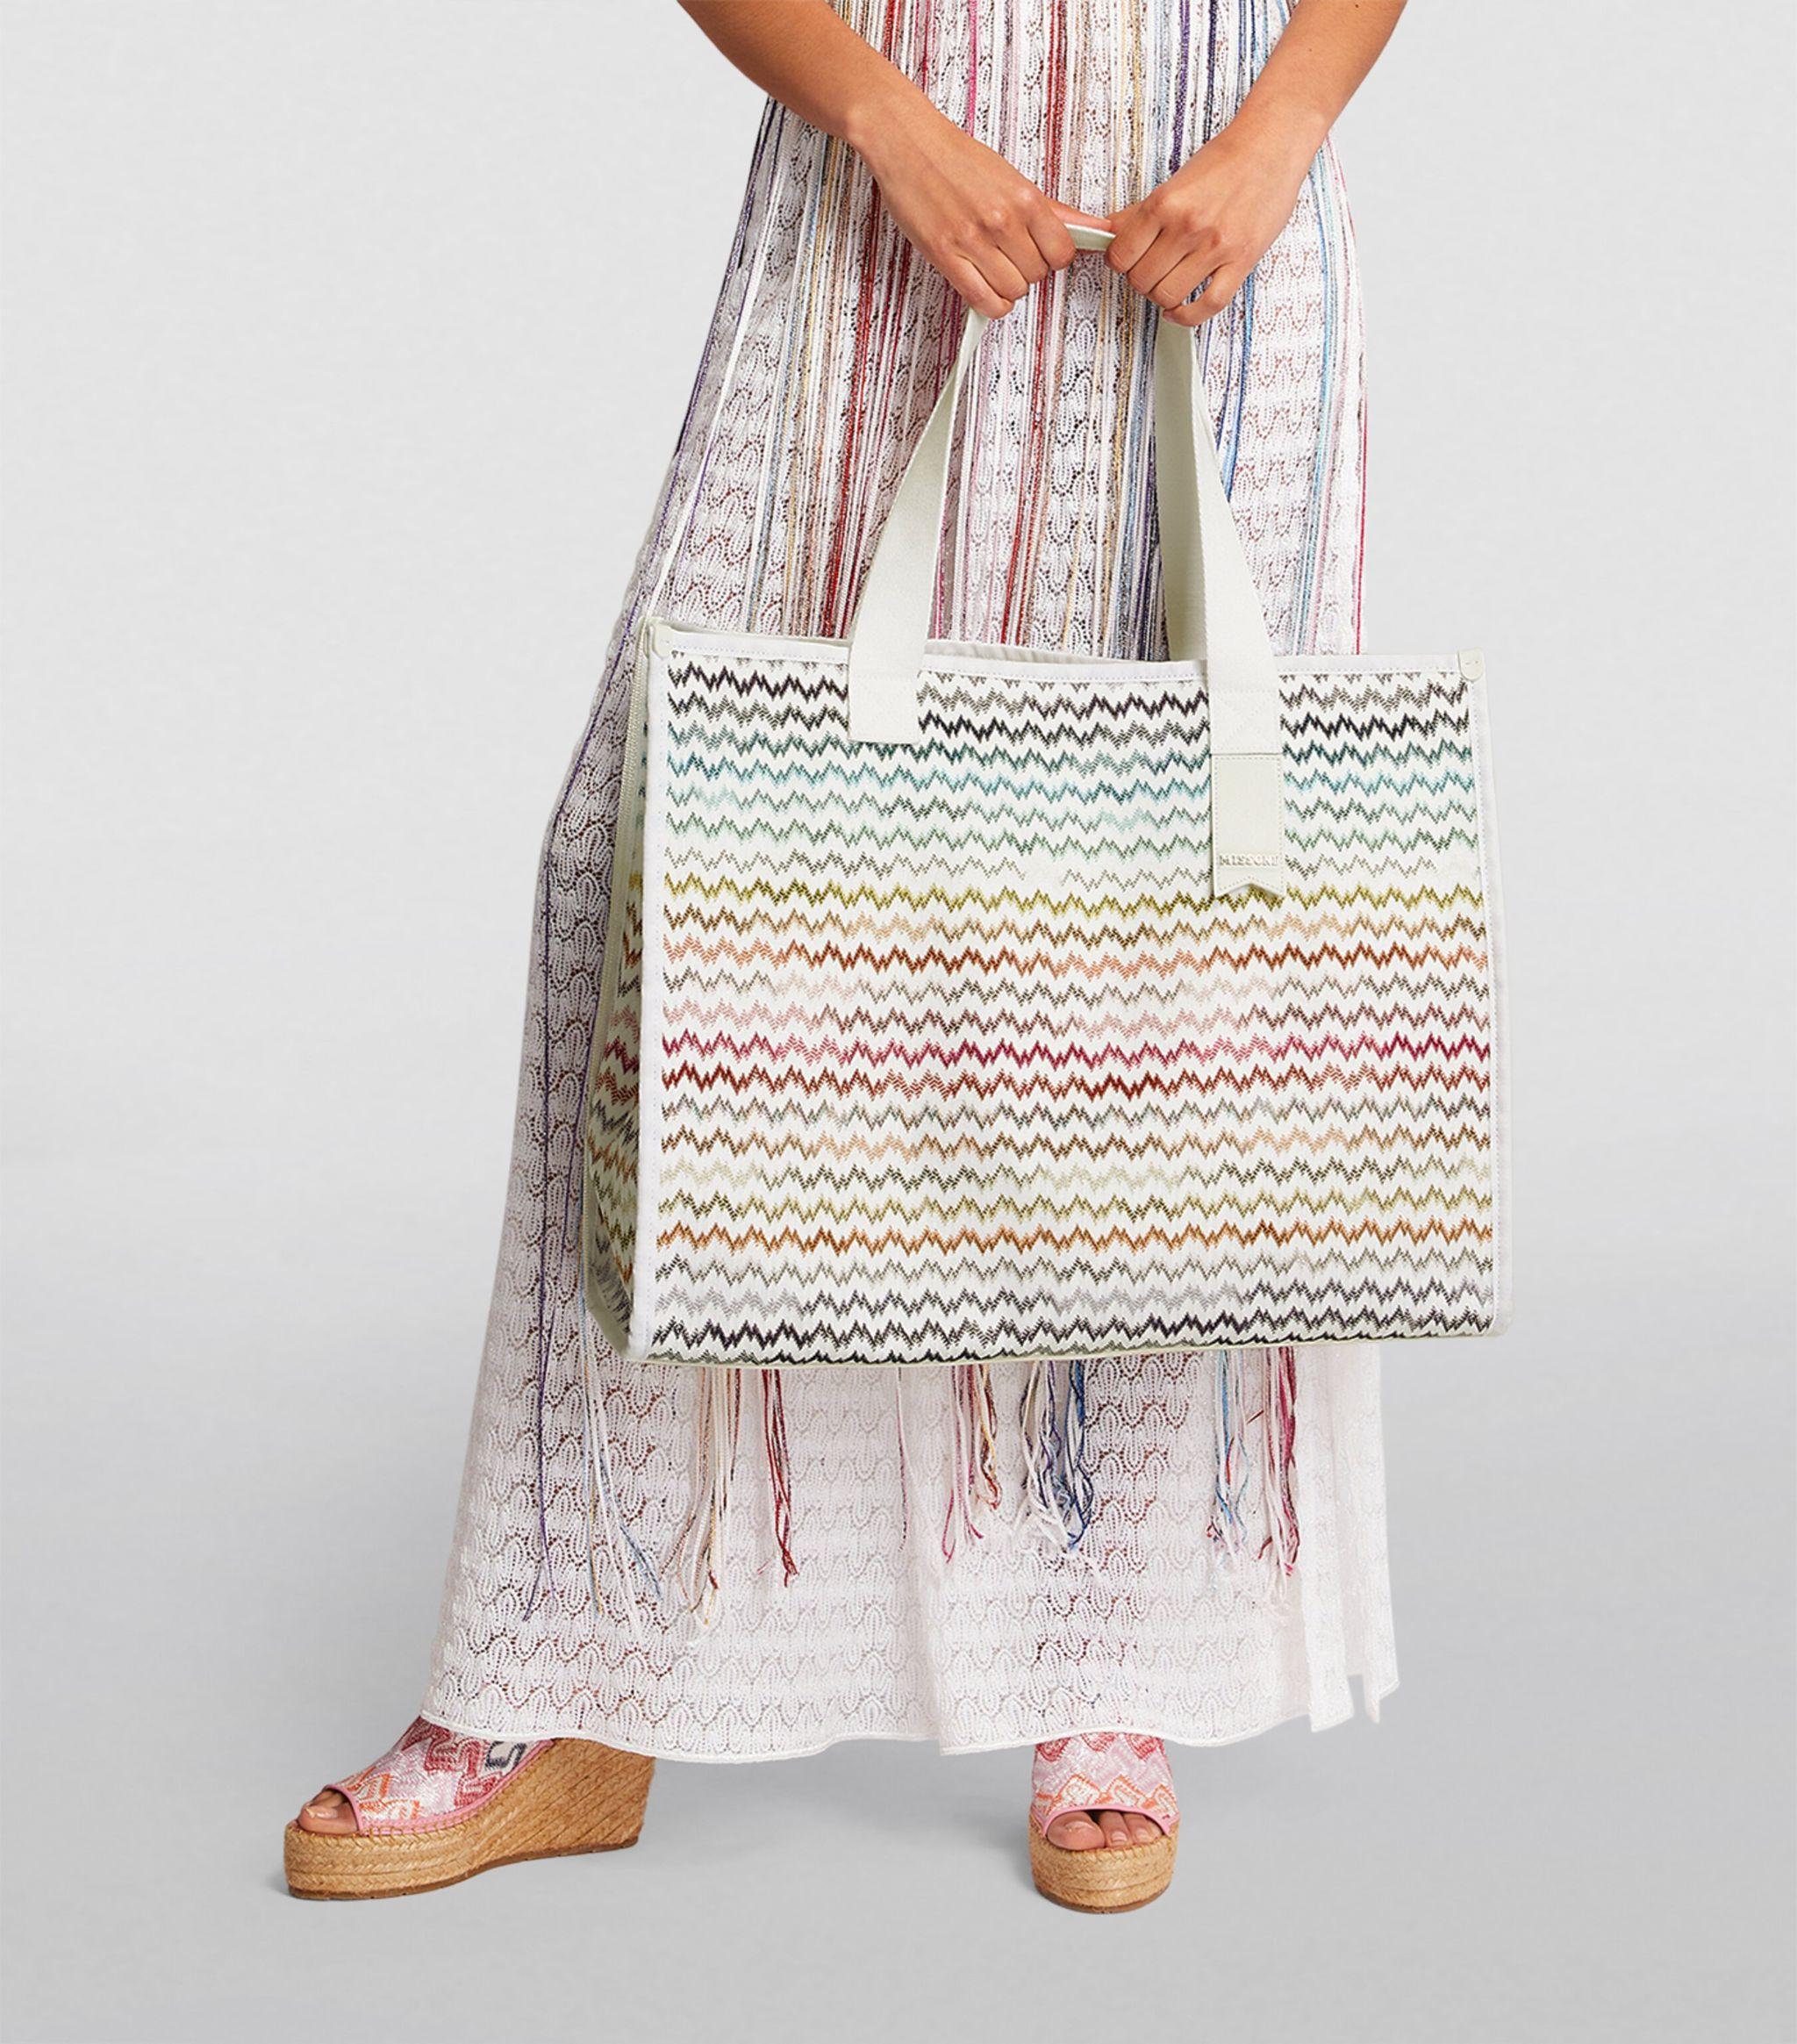 Missoni Zigzag Shopping Bag in Natural | Lyst